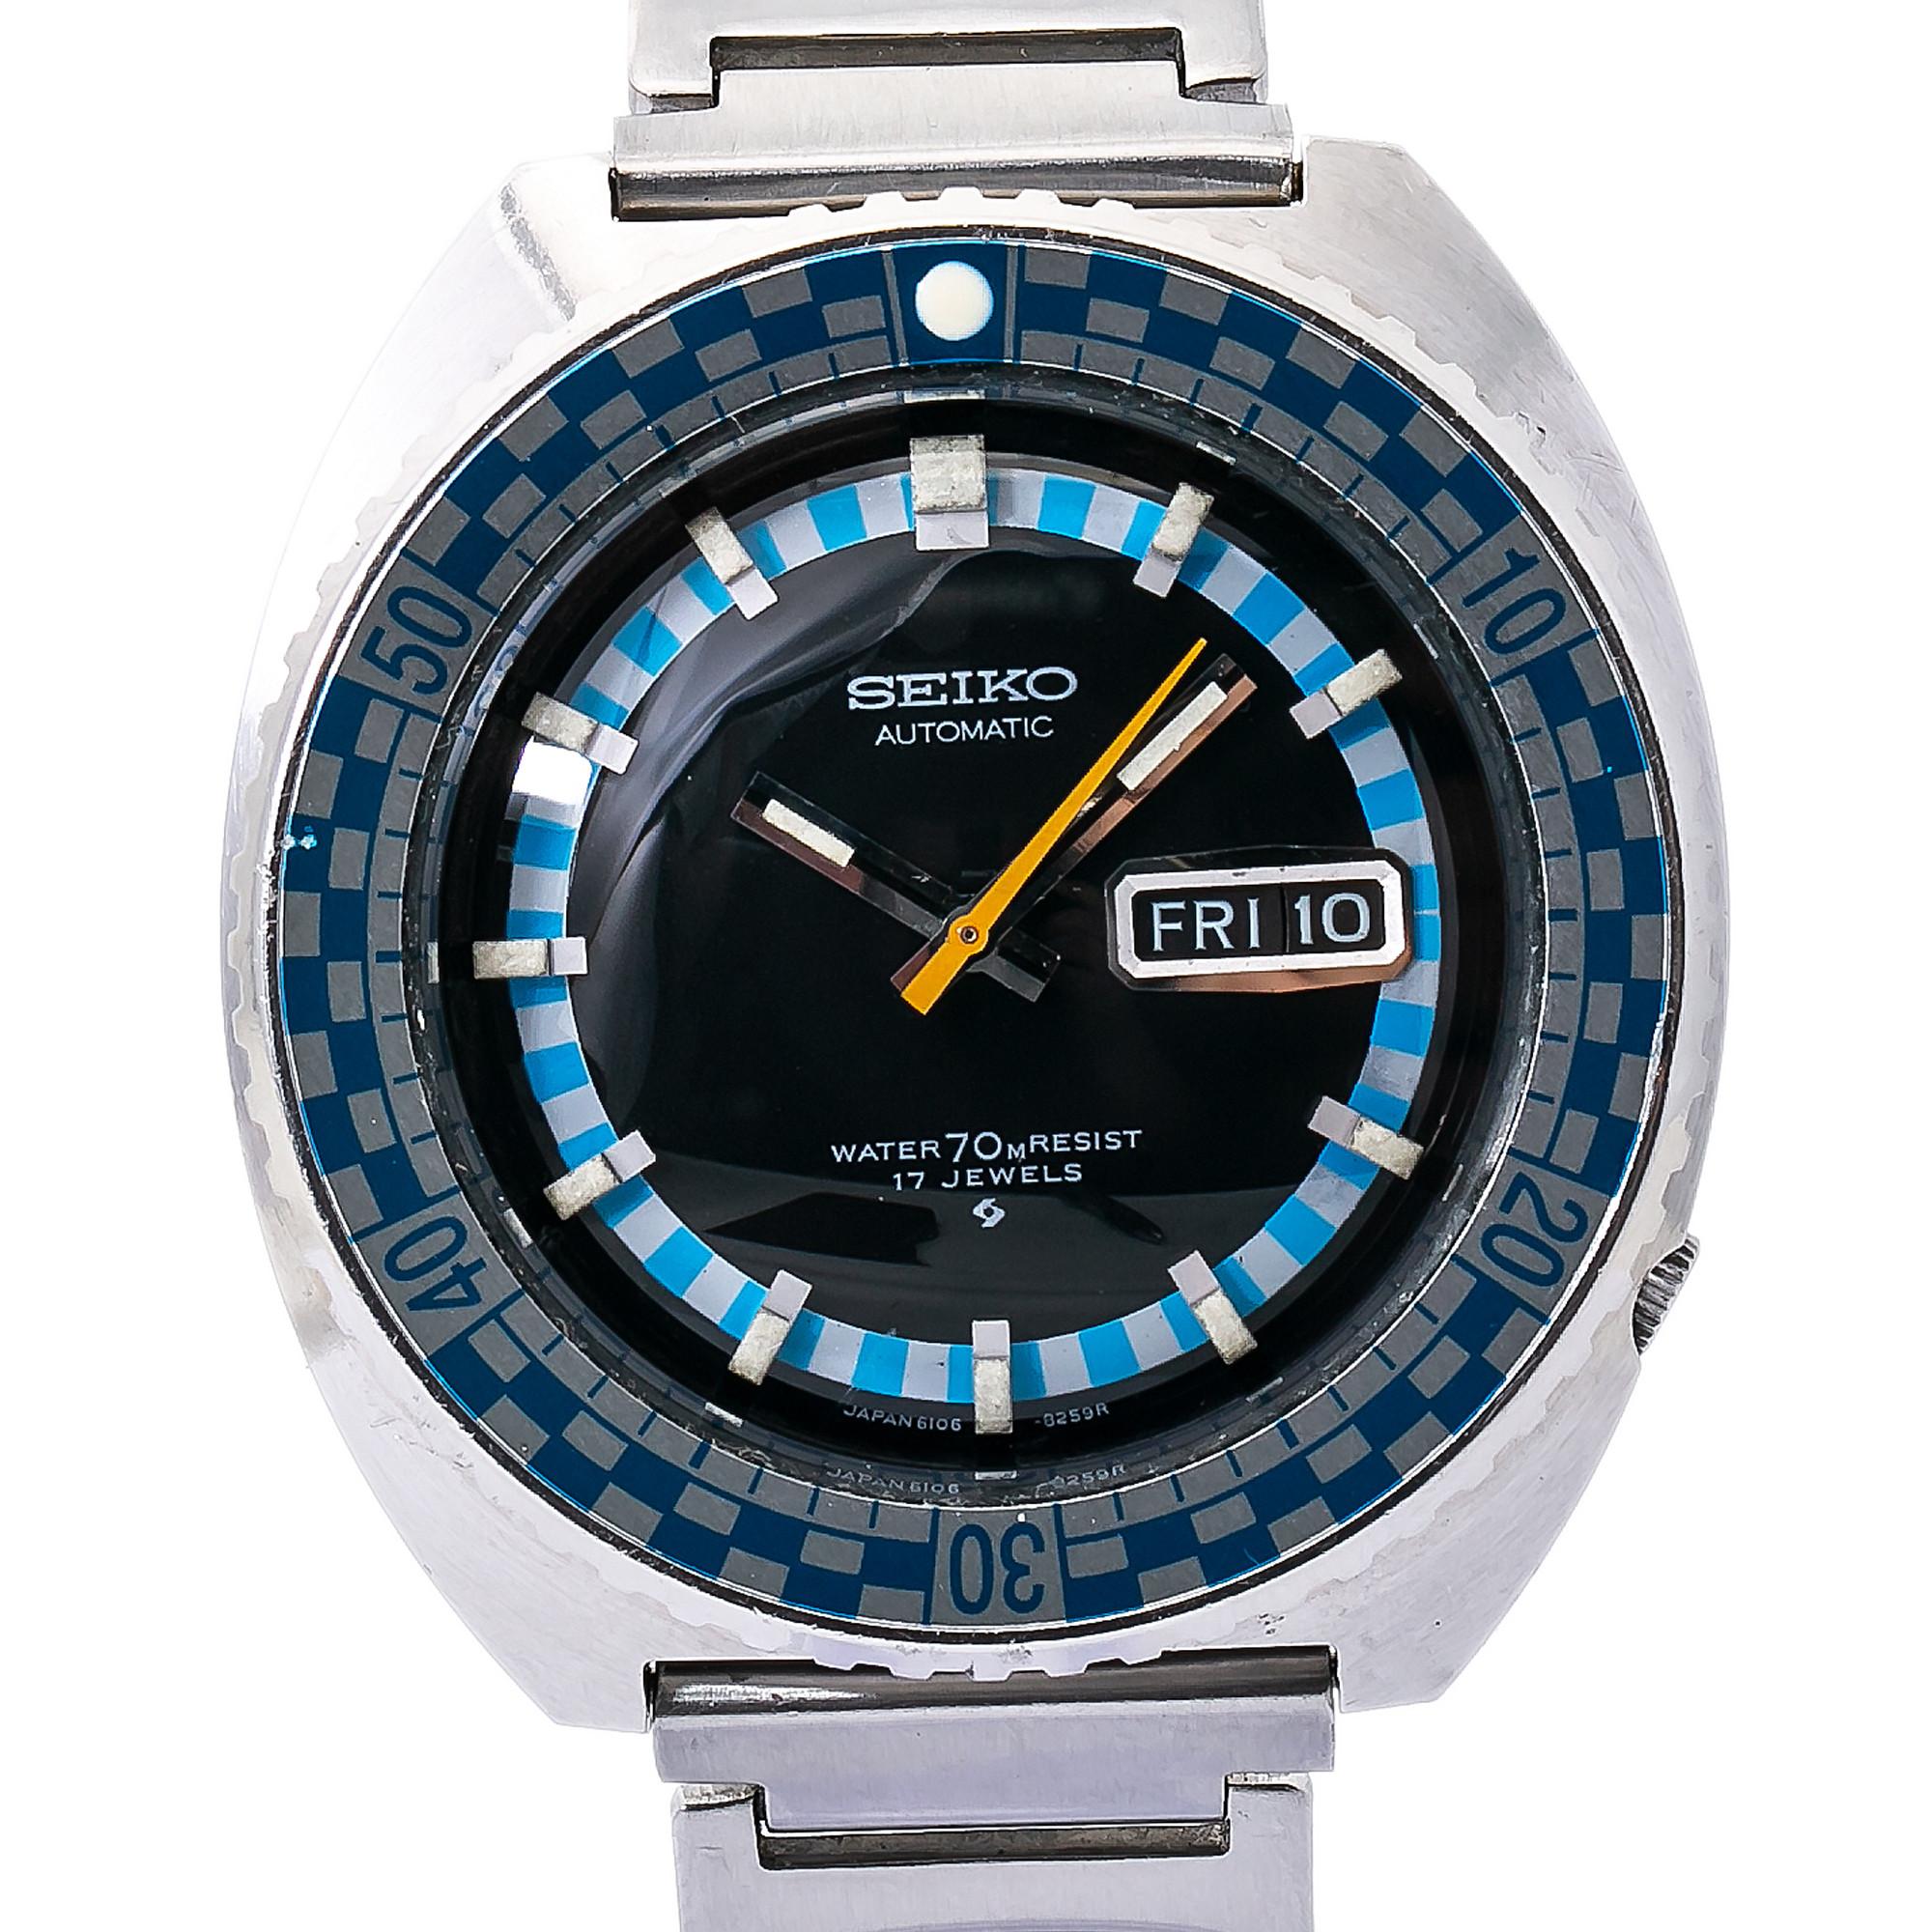 Contemporary Seiko Rally Diver 6106-8227, Black Dial, Certified and Warranty